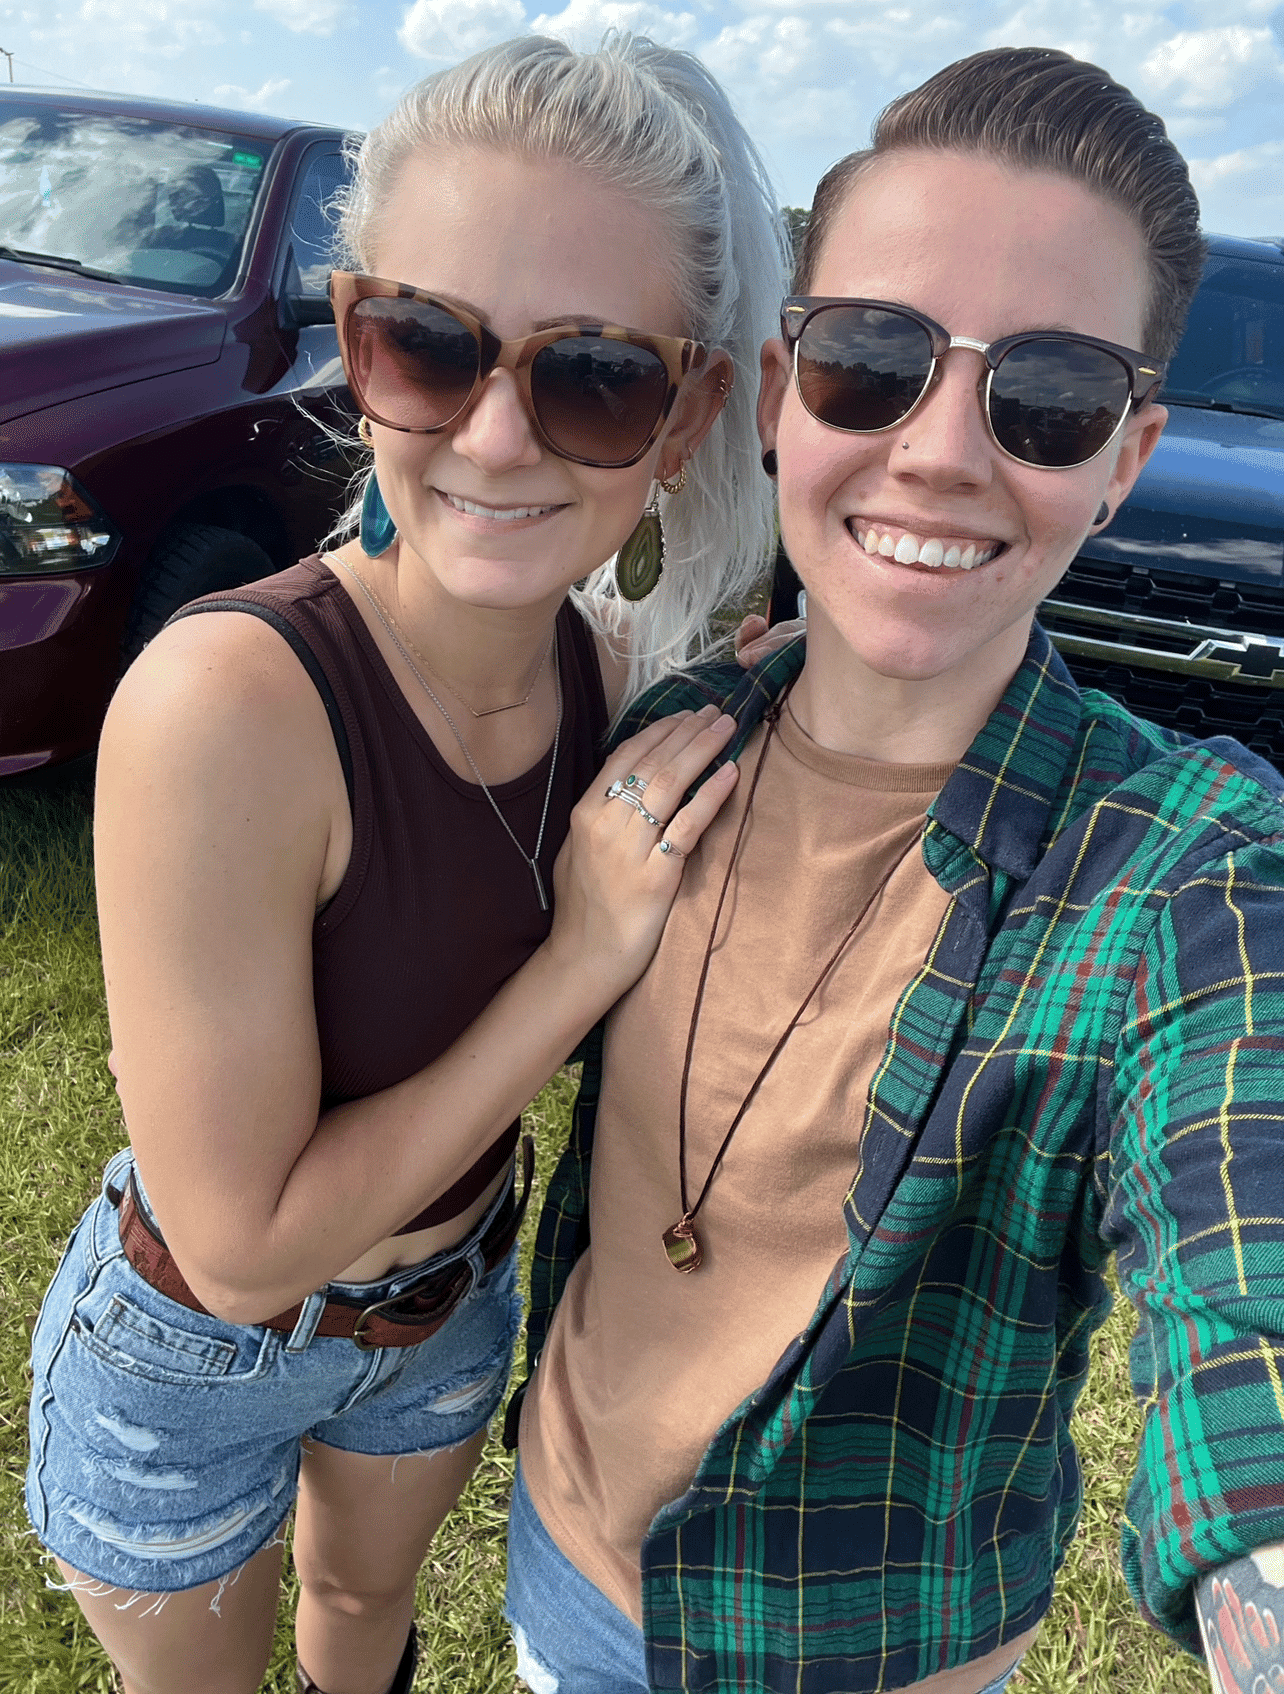 couple wearing sunglasses stand together taking a selfie in front of parked cars behind them